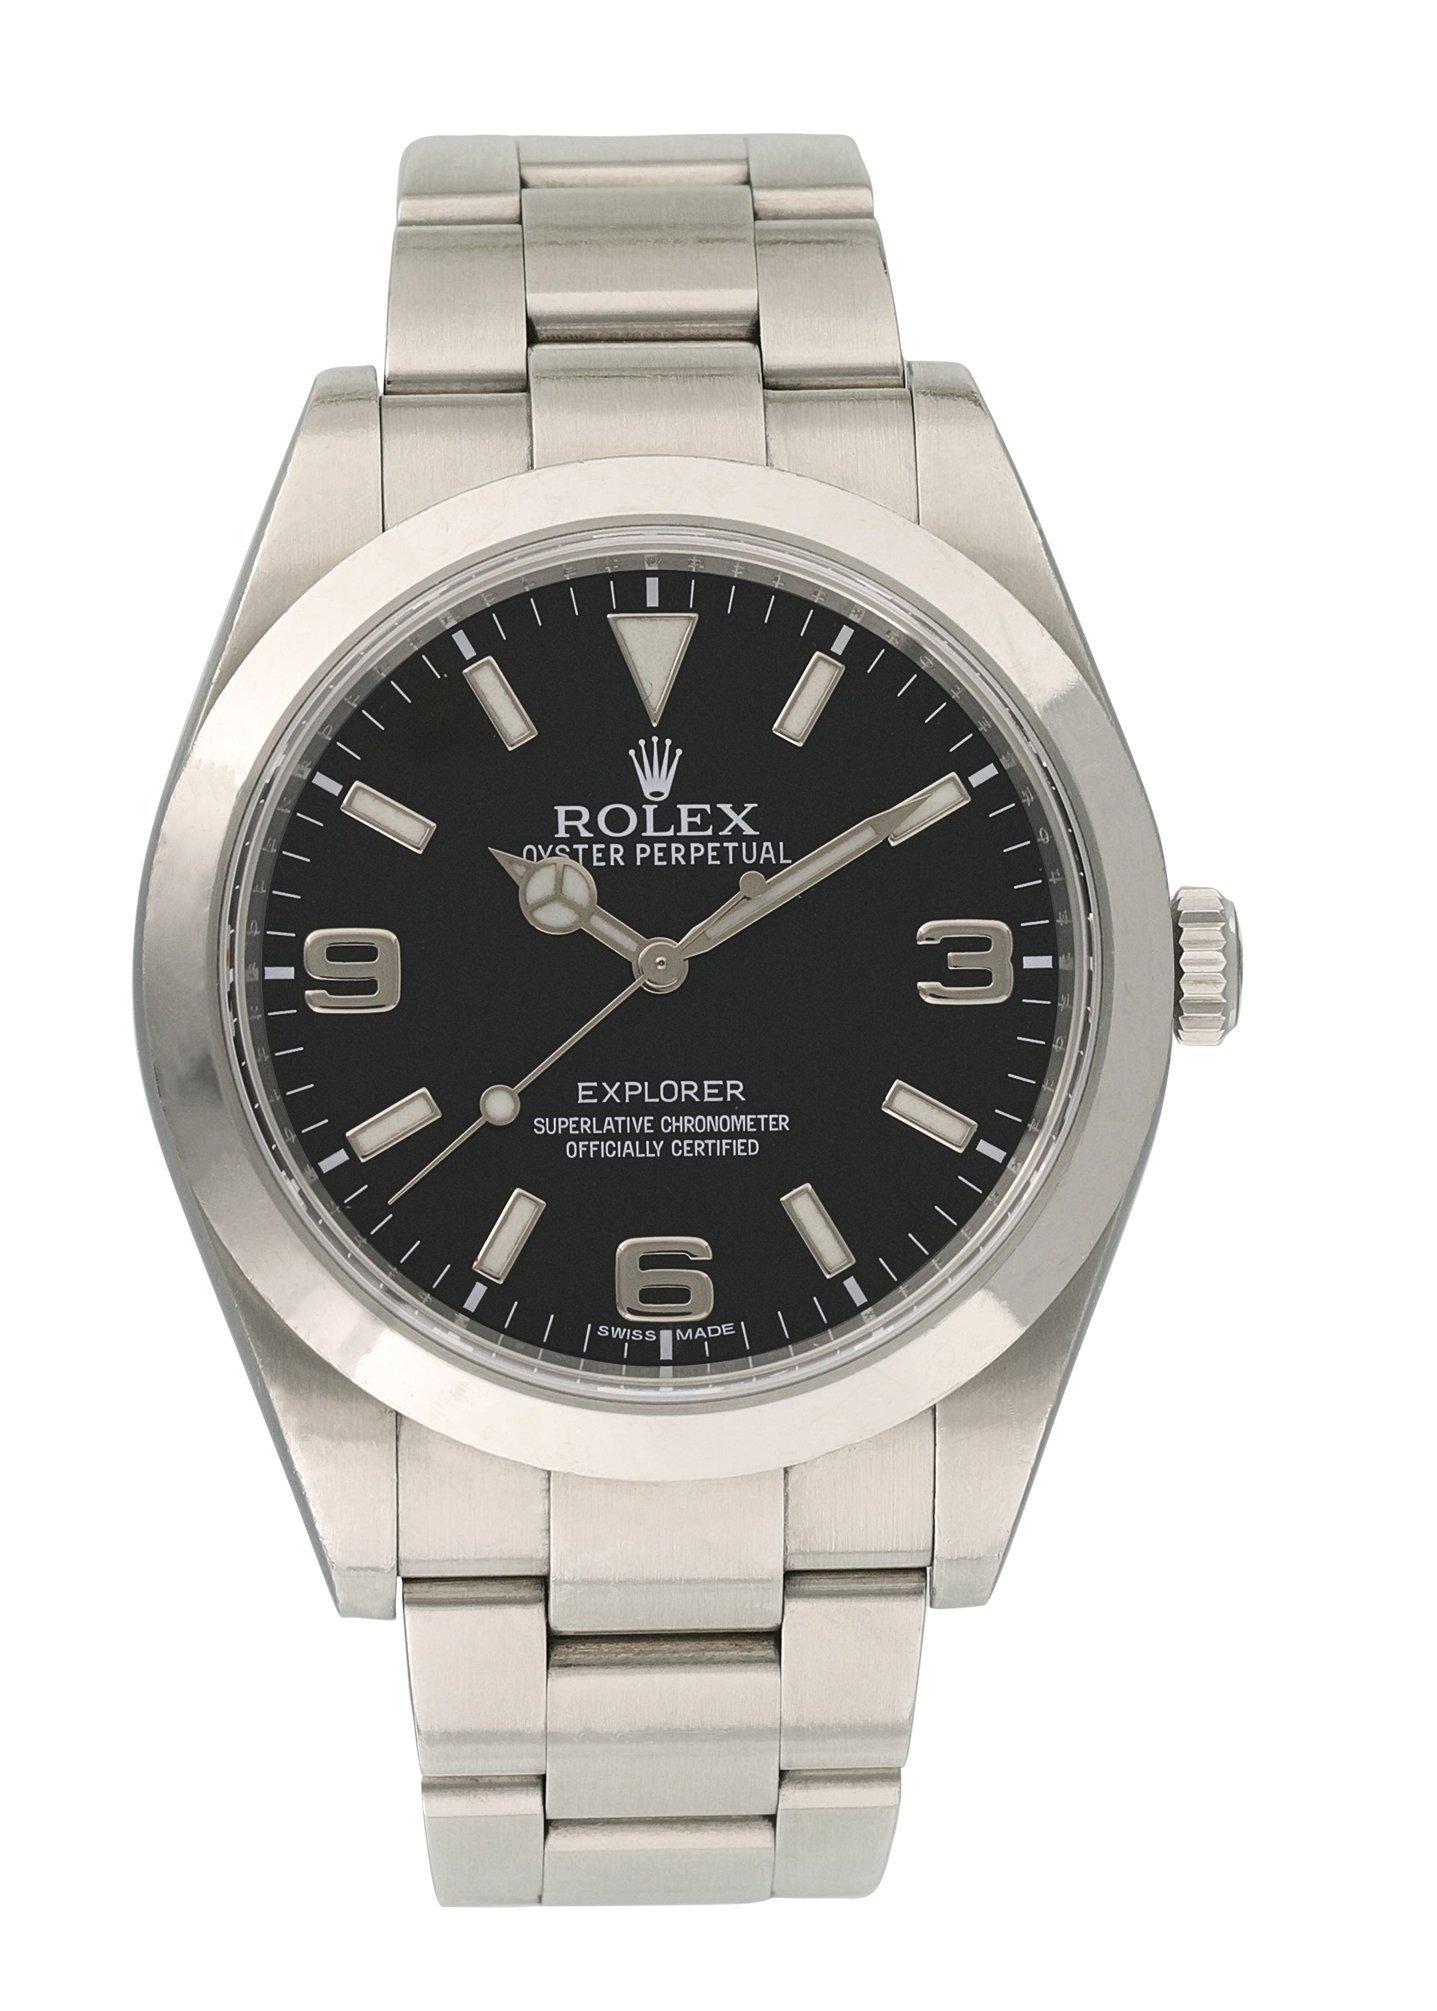 Rolex Explorer 214270 Men Watch
39mm Stainless Steel case. 
Stainless Steel smooth bezel. 
Black dial with Luminous Steel hands and index hour markers. 
Minute markers on the outer dial. 
Stainless Steel Bracelet with Fold Over Clasp. 
Will fit up